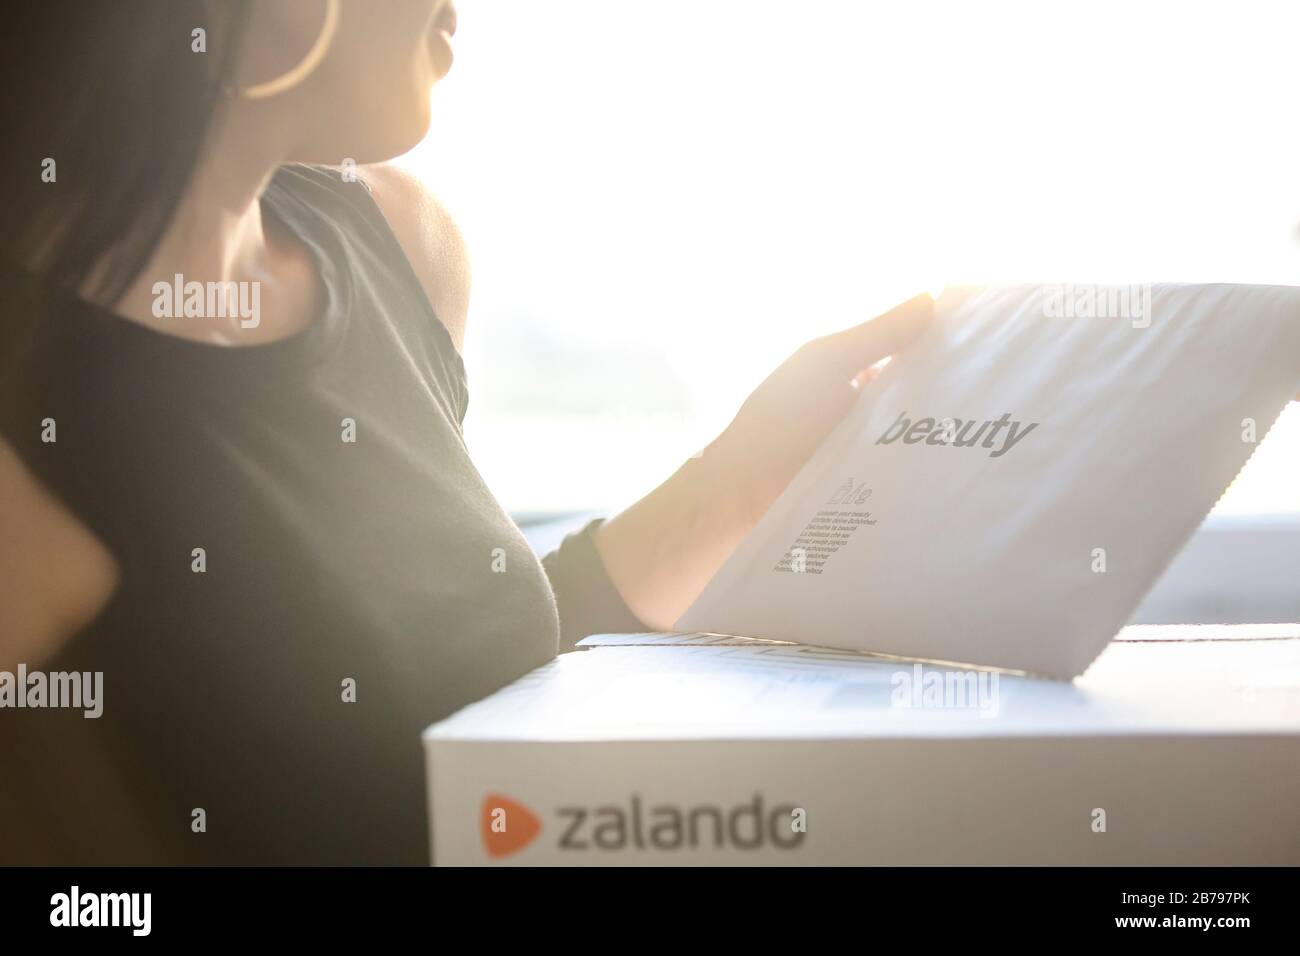 Poznan, Poland - March 14, 2020: Woman holding a Zalando box with ordered items from the online shop. Stock Photo